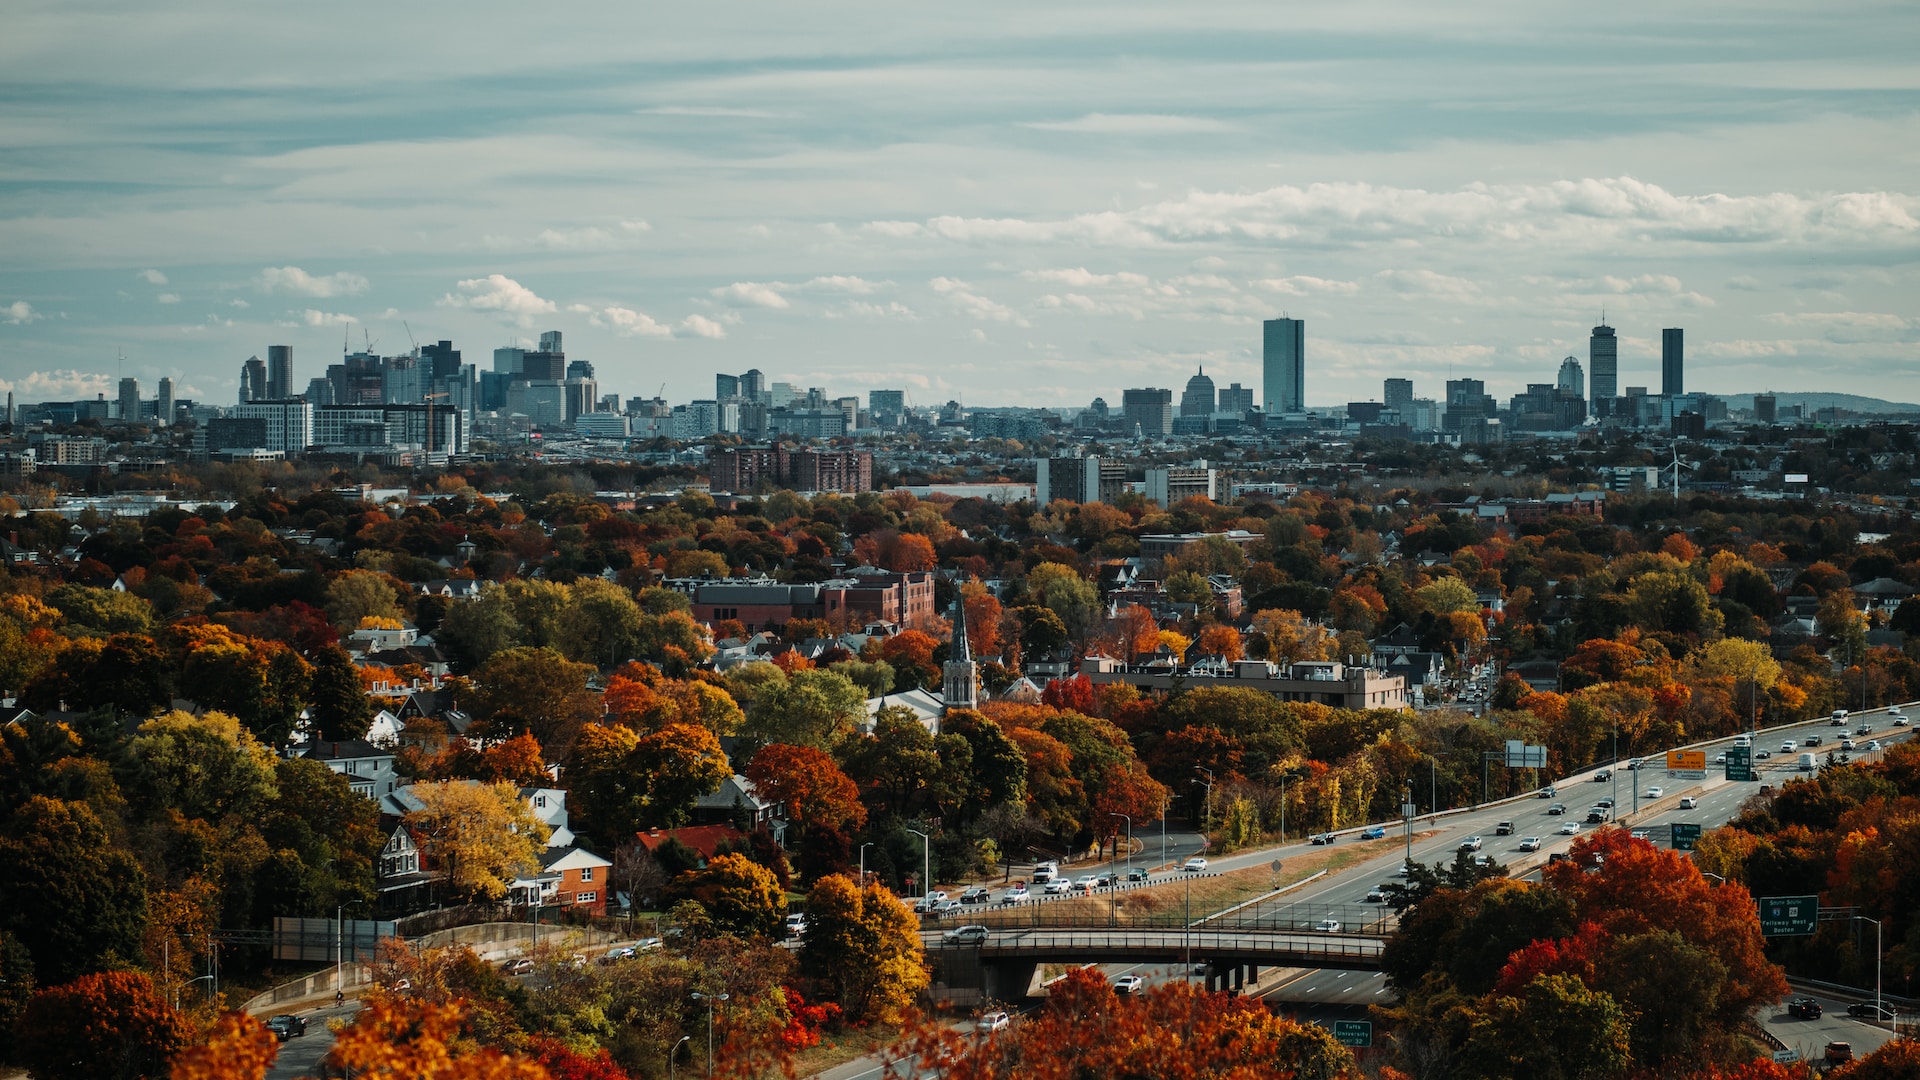 trees, the city of Boston in the background